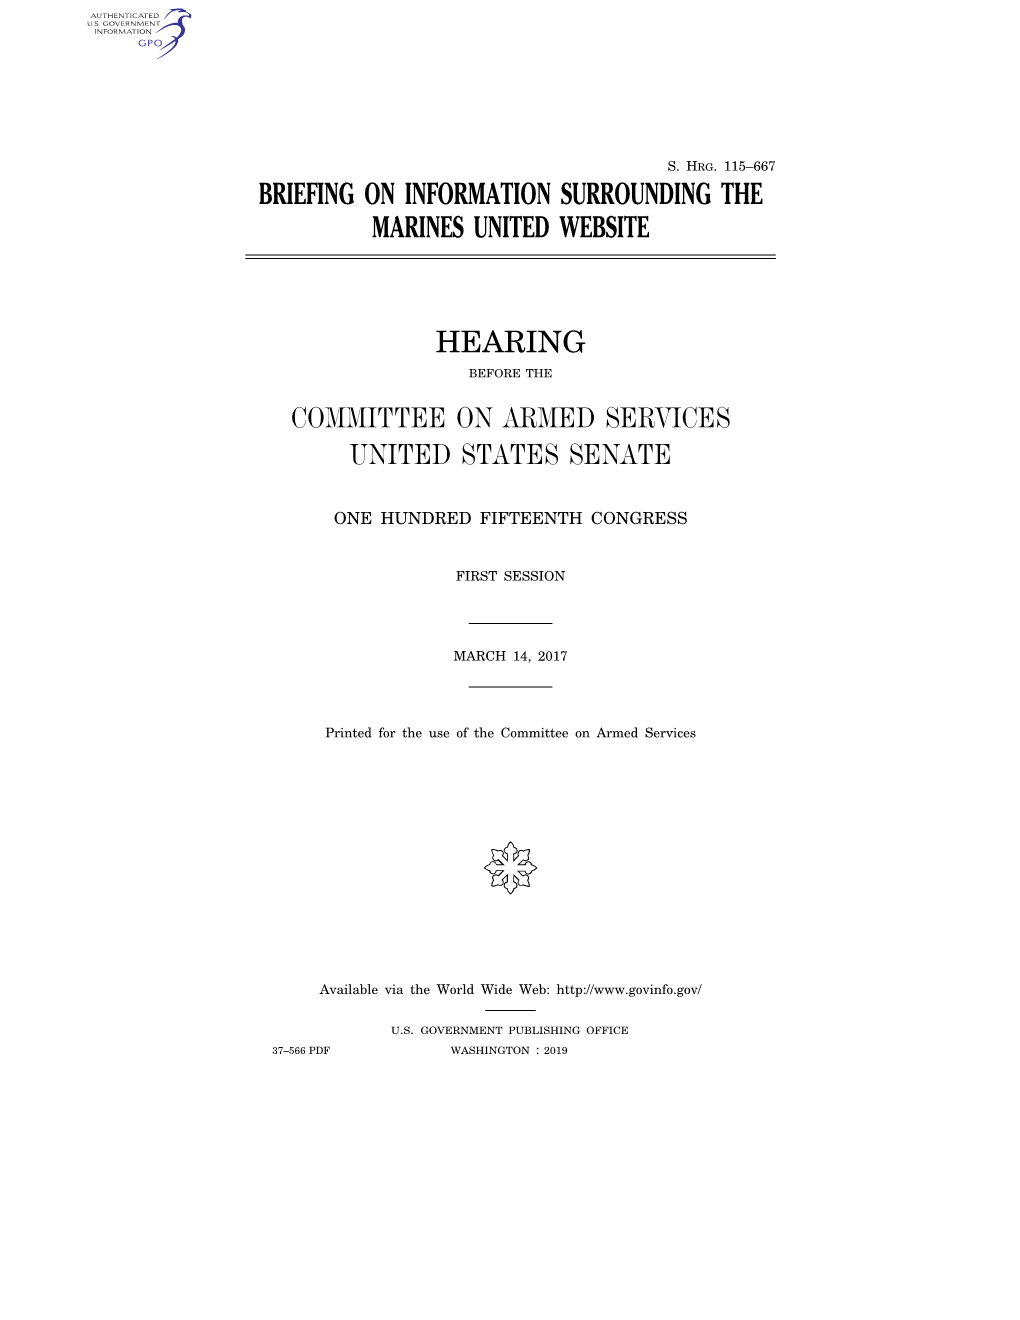 Briefing on Information Surrounding the Marines United Website Hearing